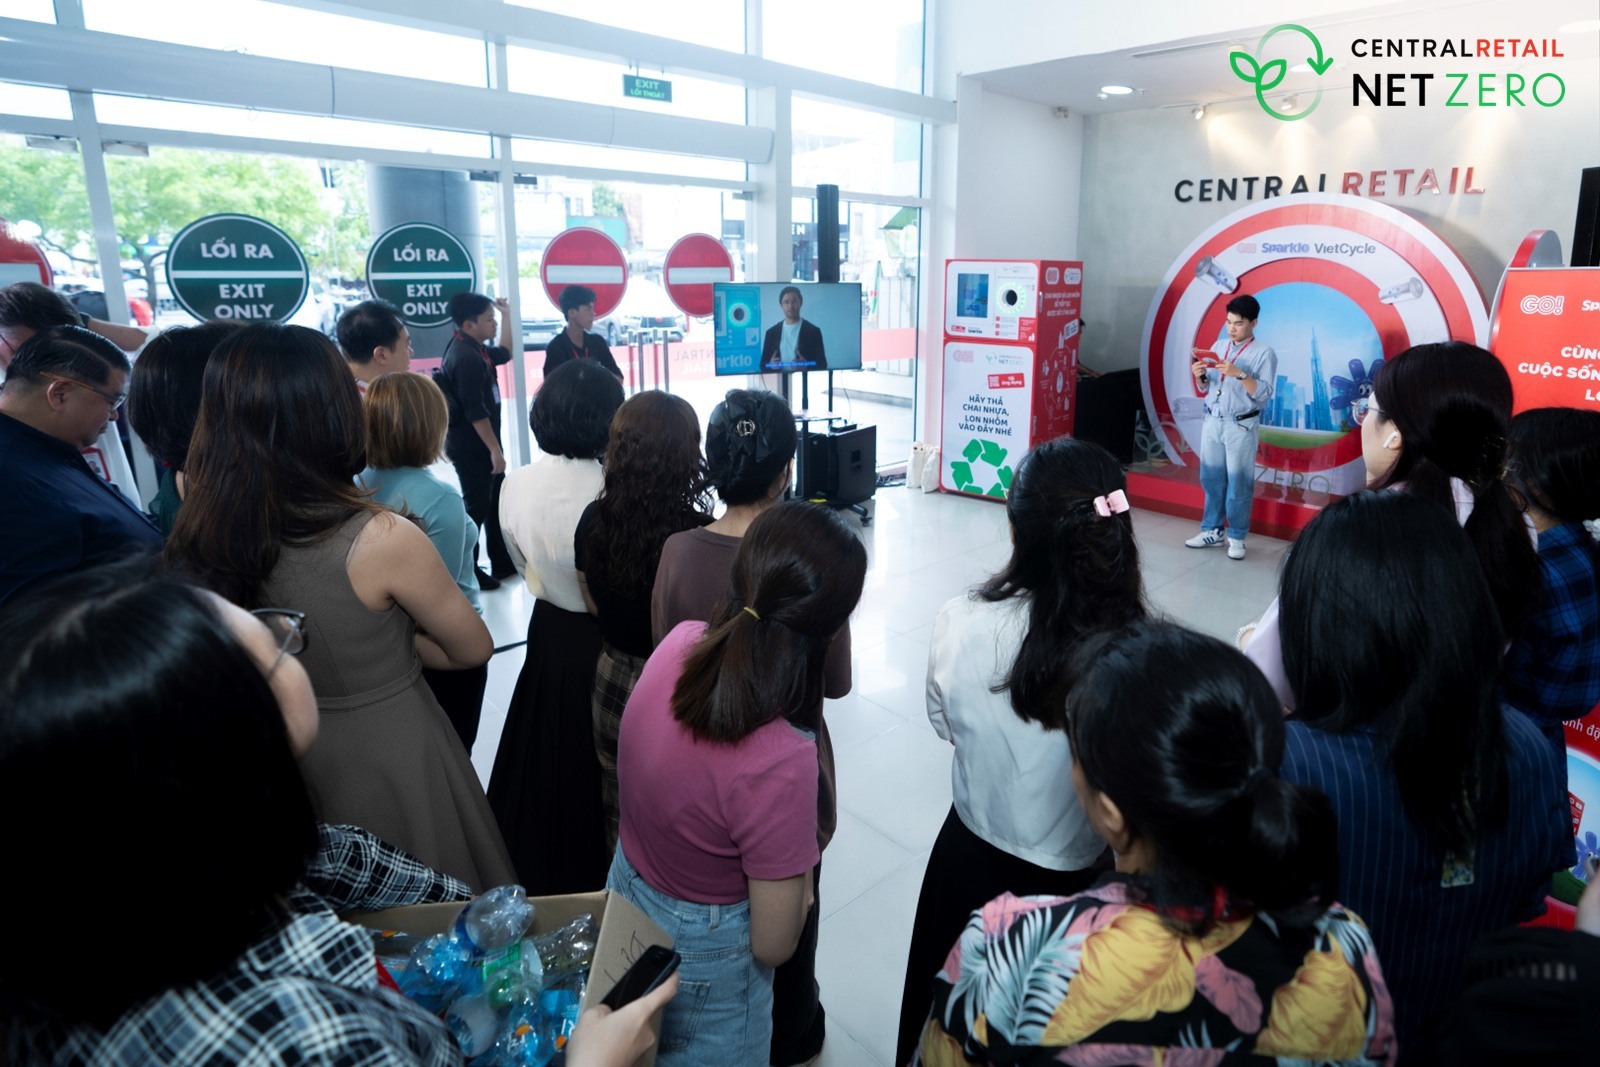 Sparklomat Launched at Central Retail’s Head Office Following Mall Success